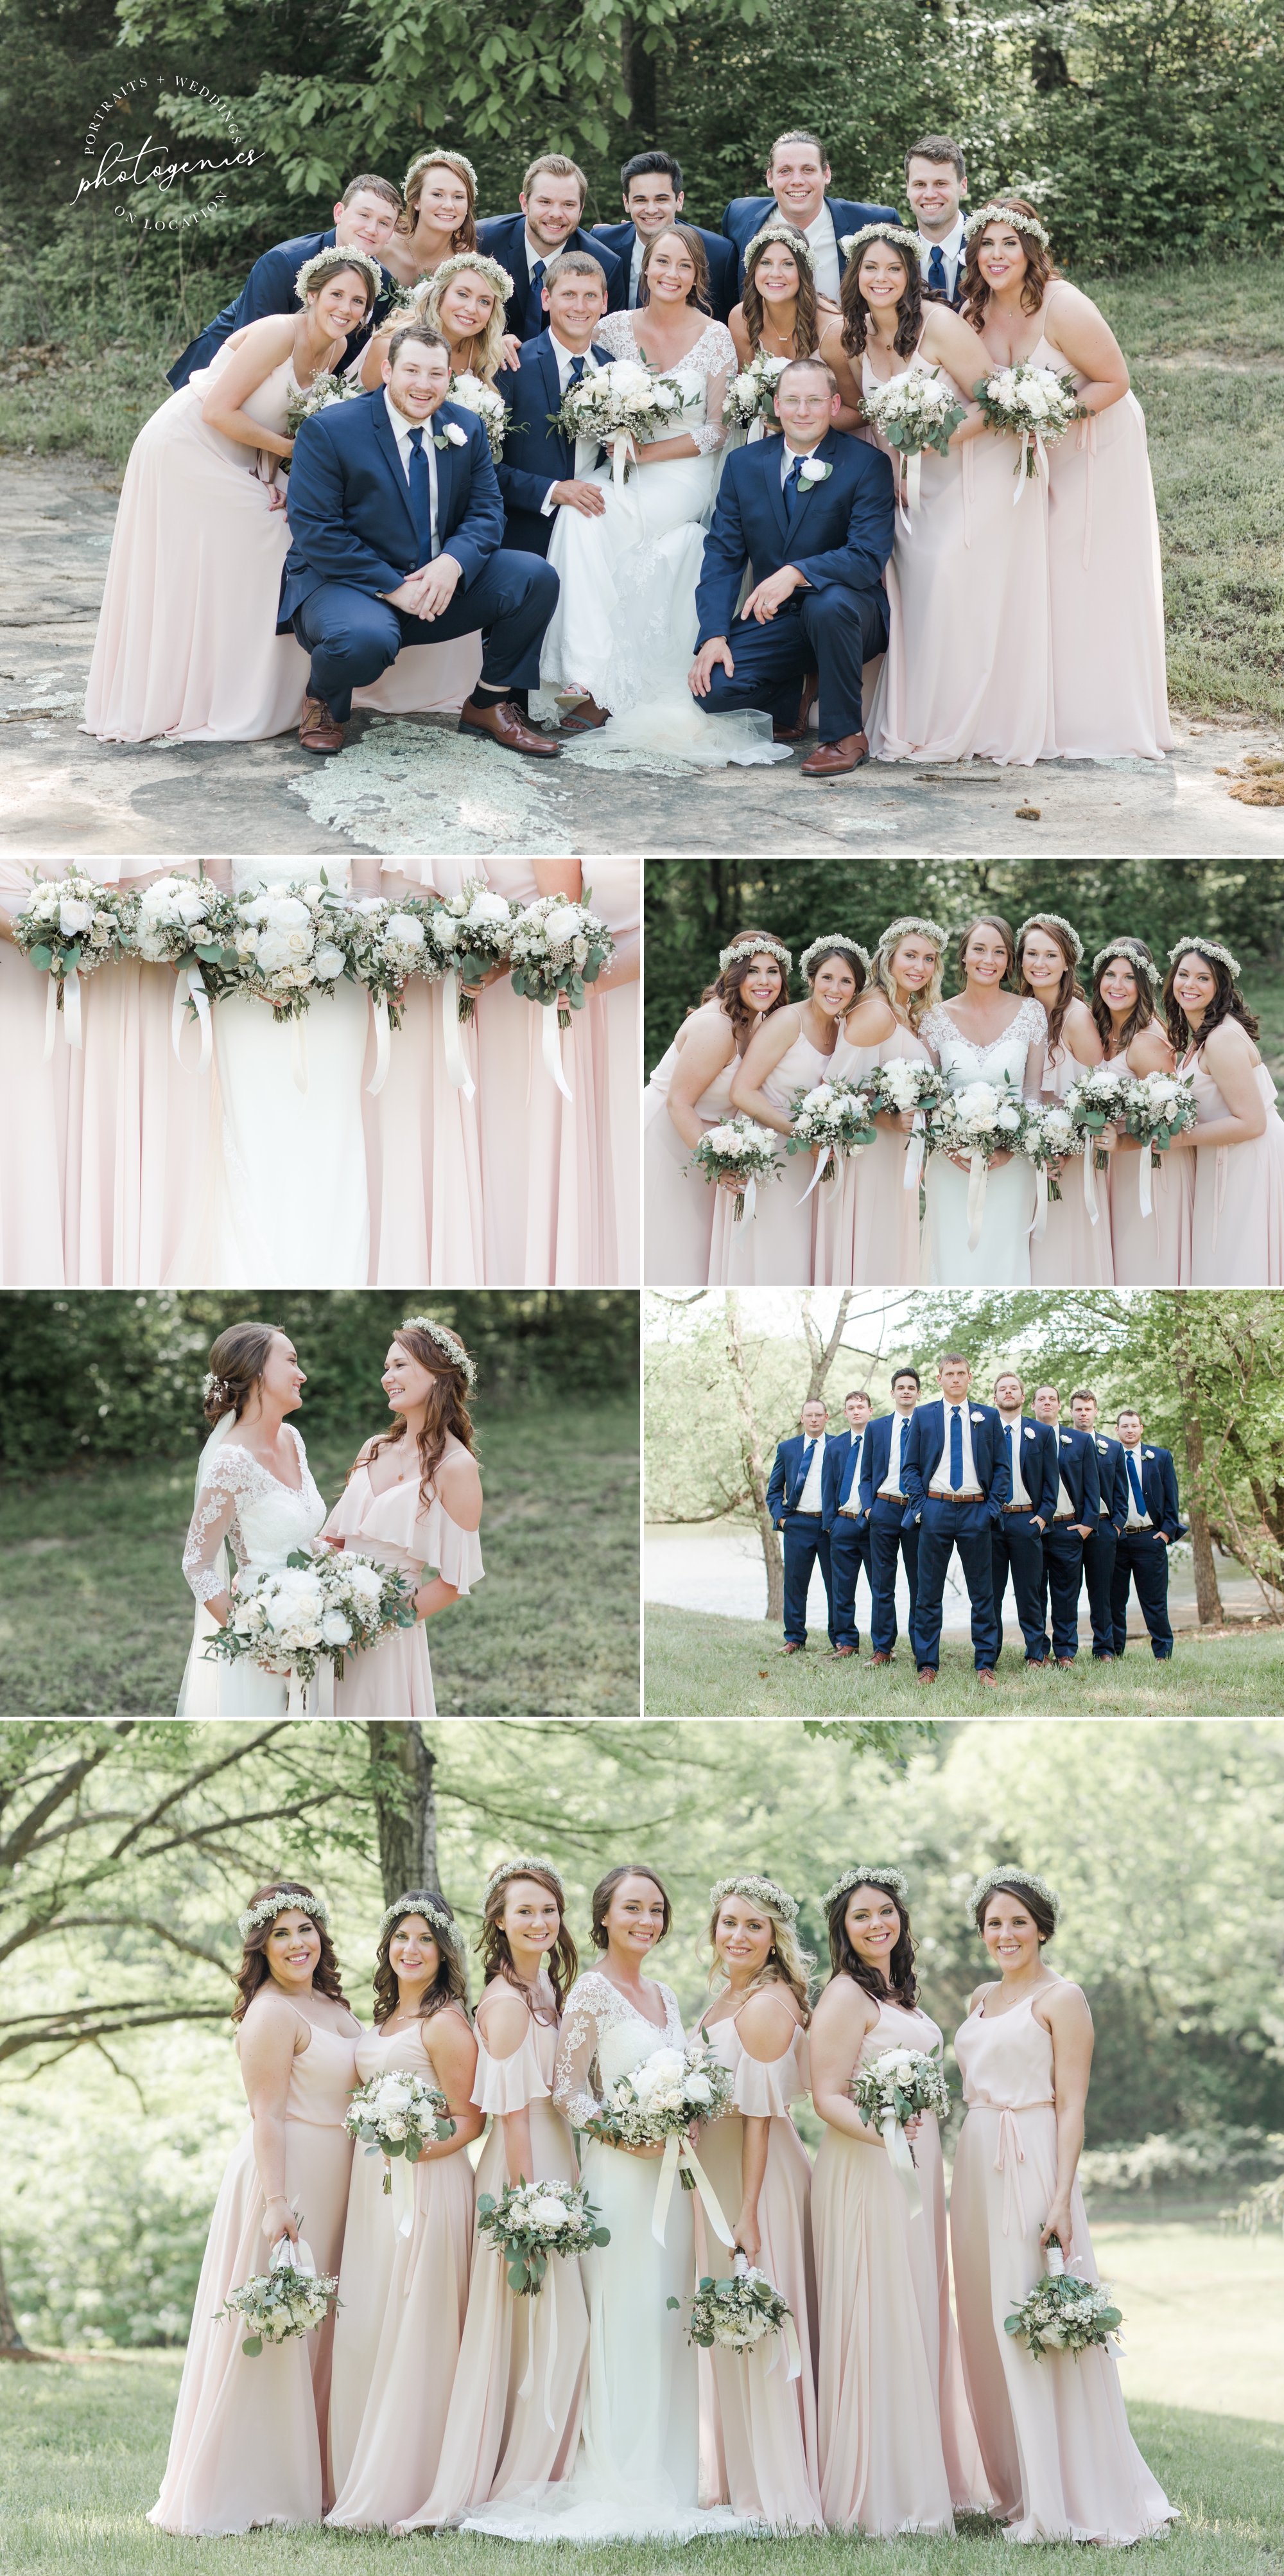 wedding_washington_mo_missouri_photographer_best_of_weddings_photography_wed_country_chic_floral_crowns_navy_blush_farm